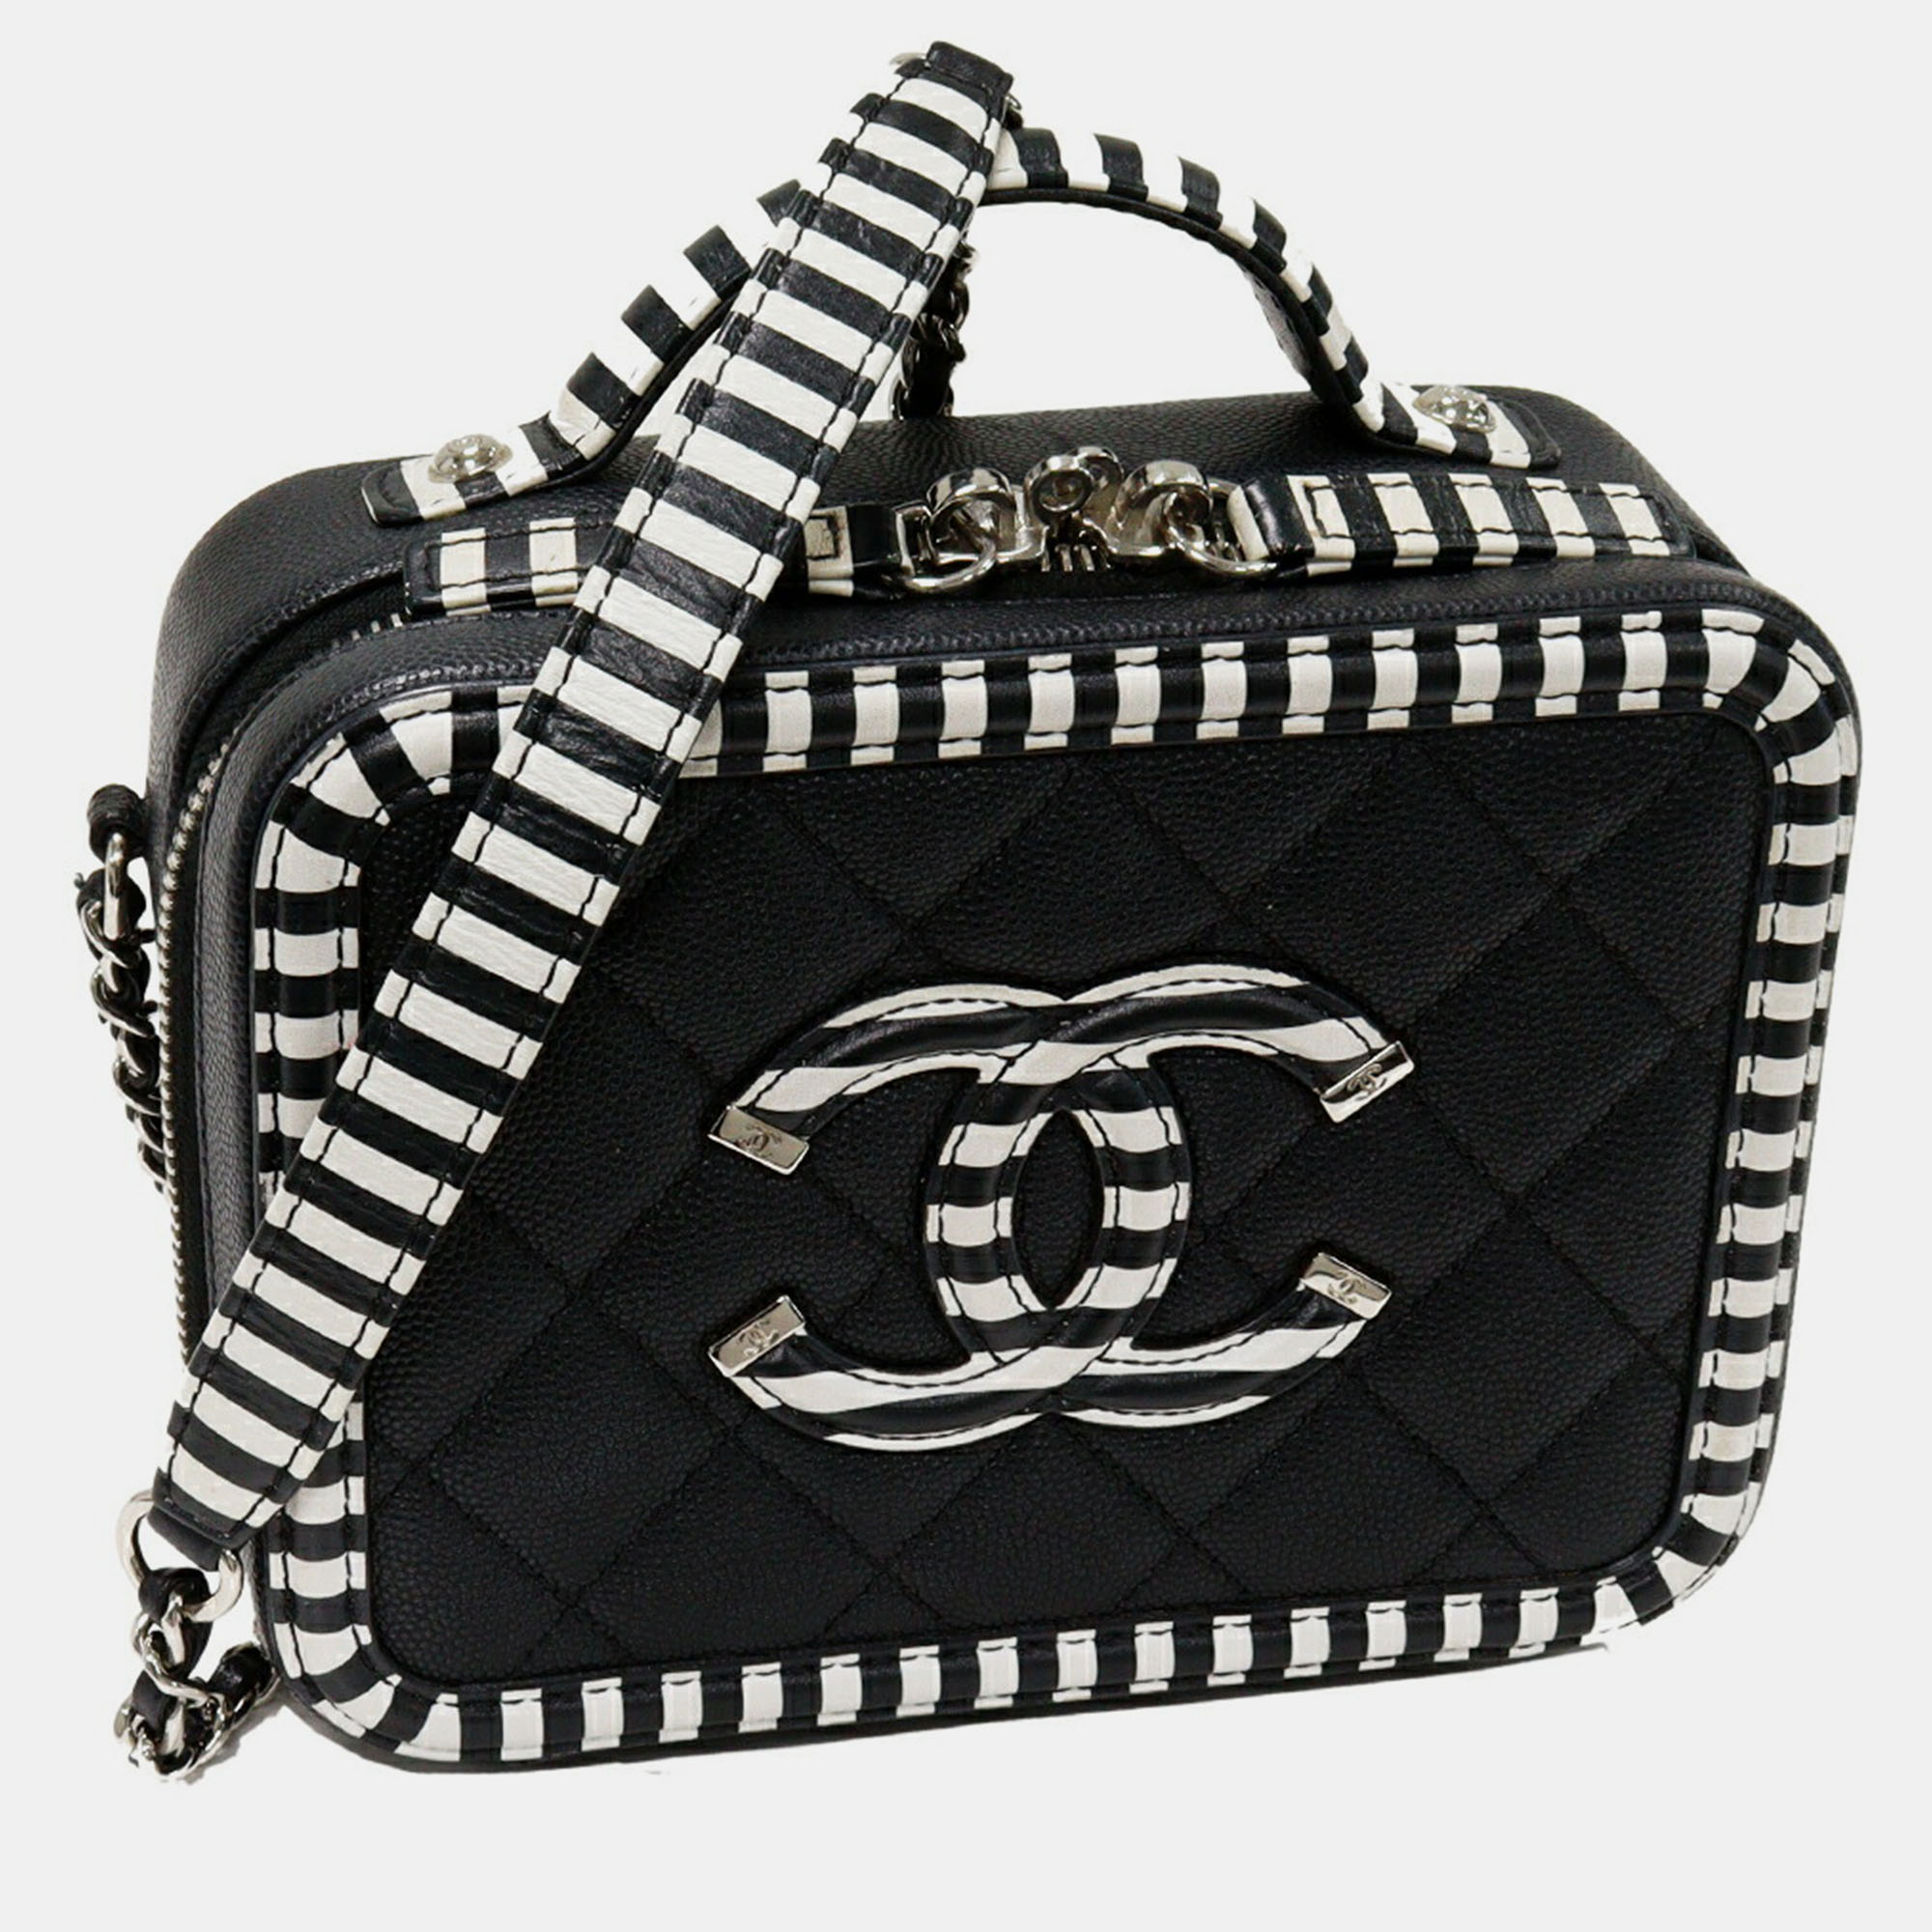 Chanel Black Quilted Caviar Leather Small CC Filigree Vanity Case Bag